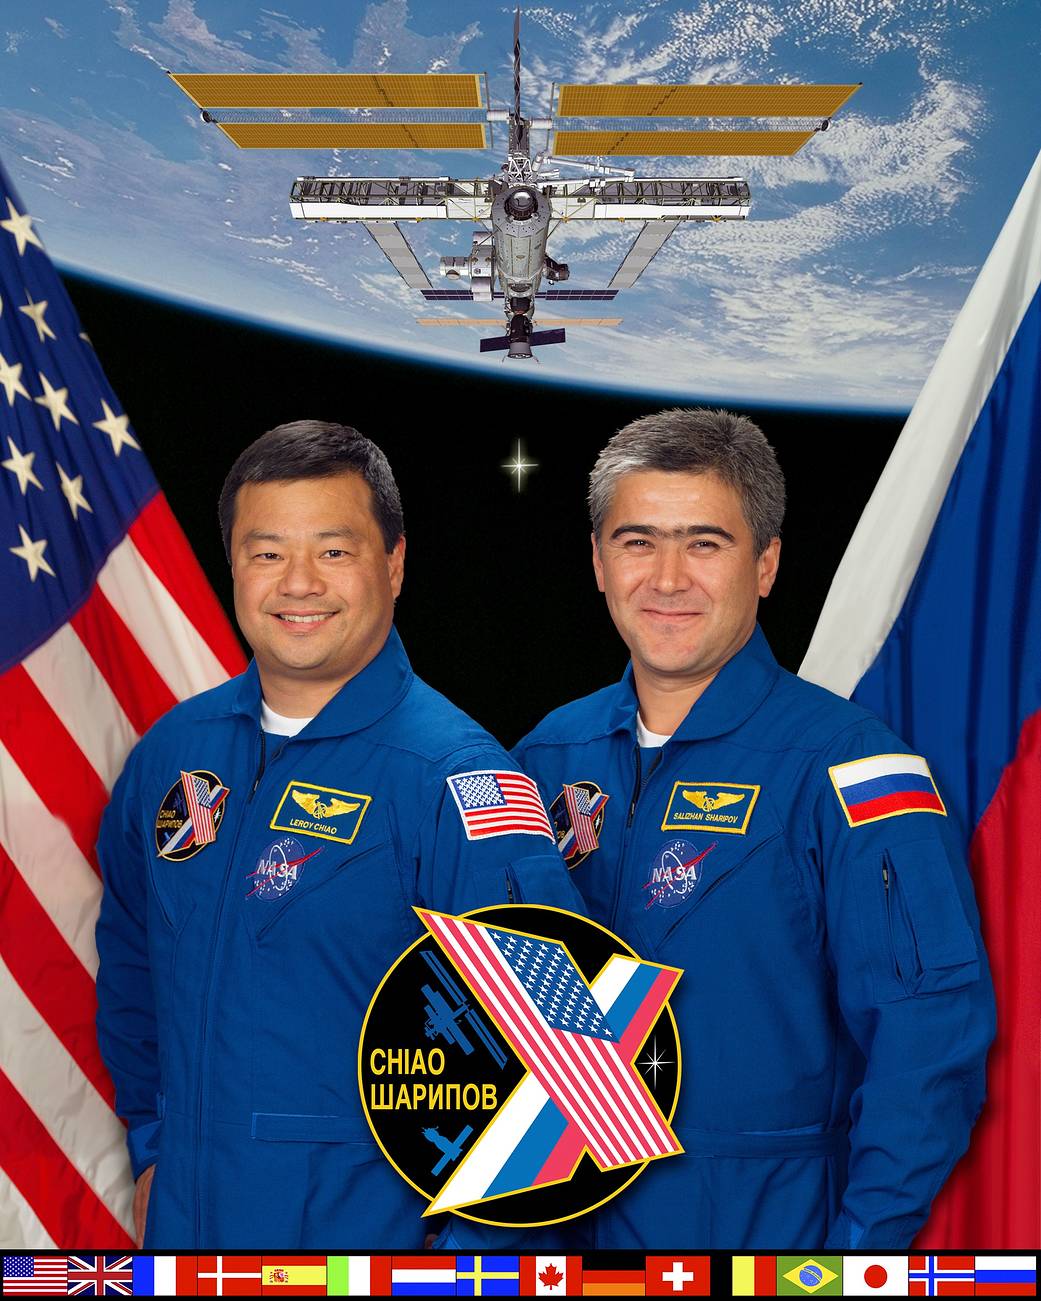 Official crew portrait of NASA astronaut Leroy Chiao and Russian cosmonaut Salizhan Sharipov